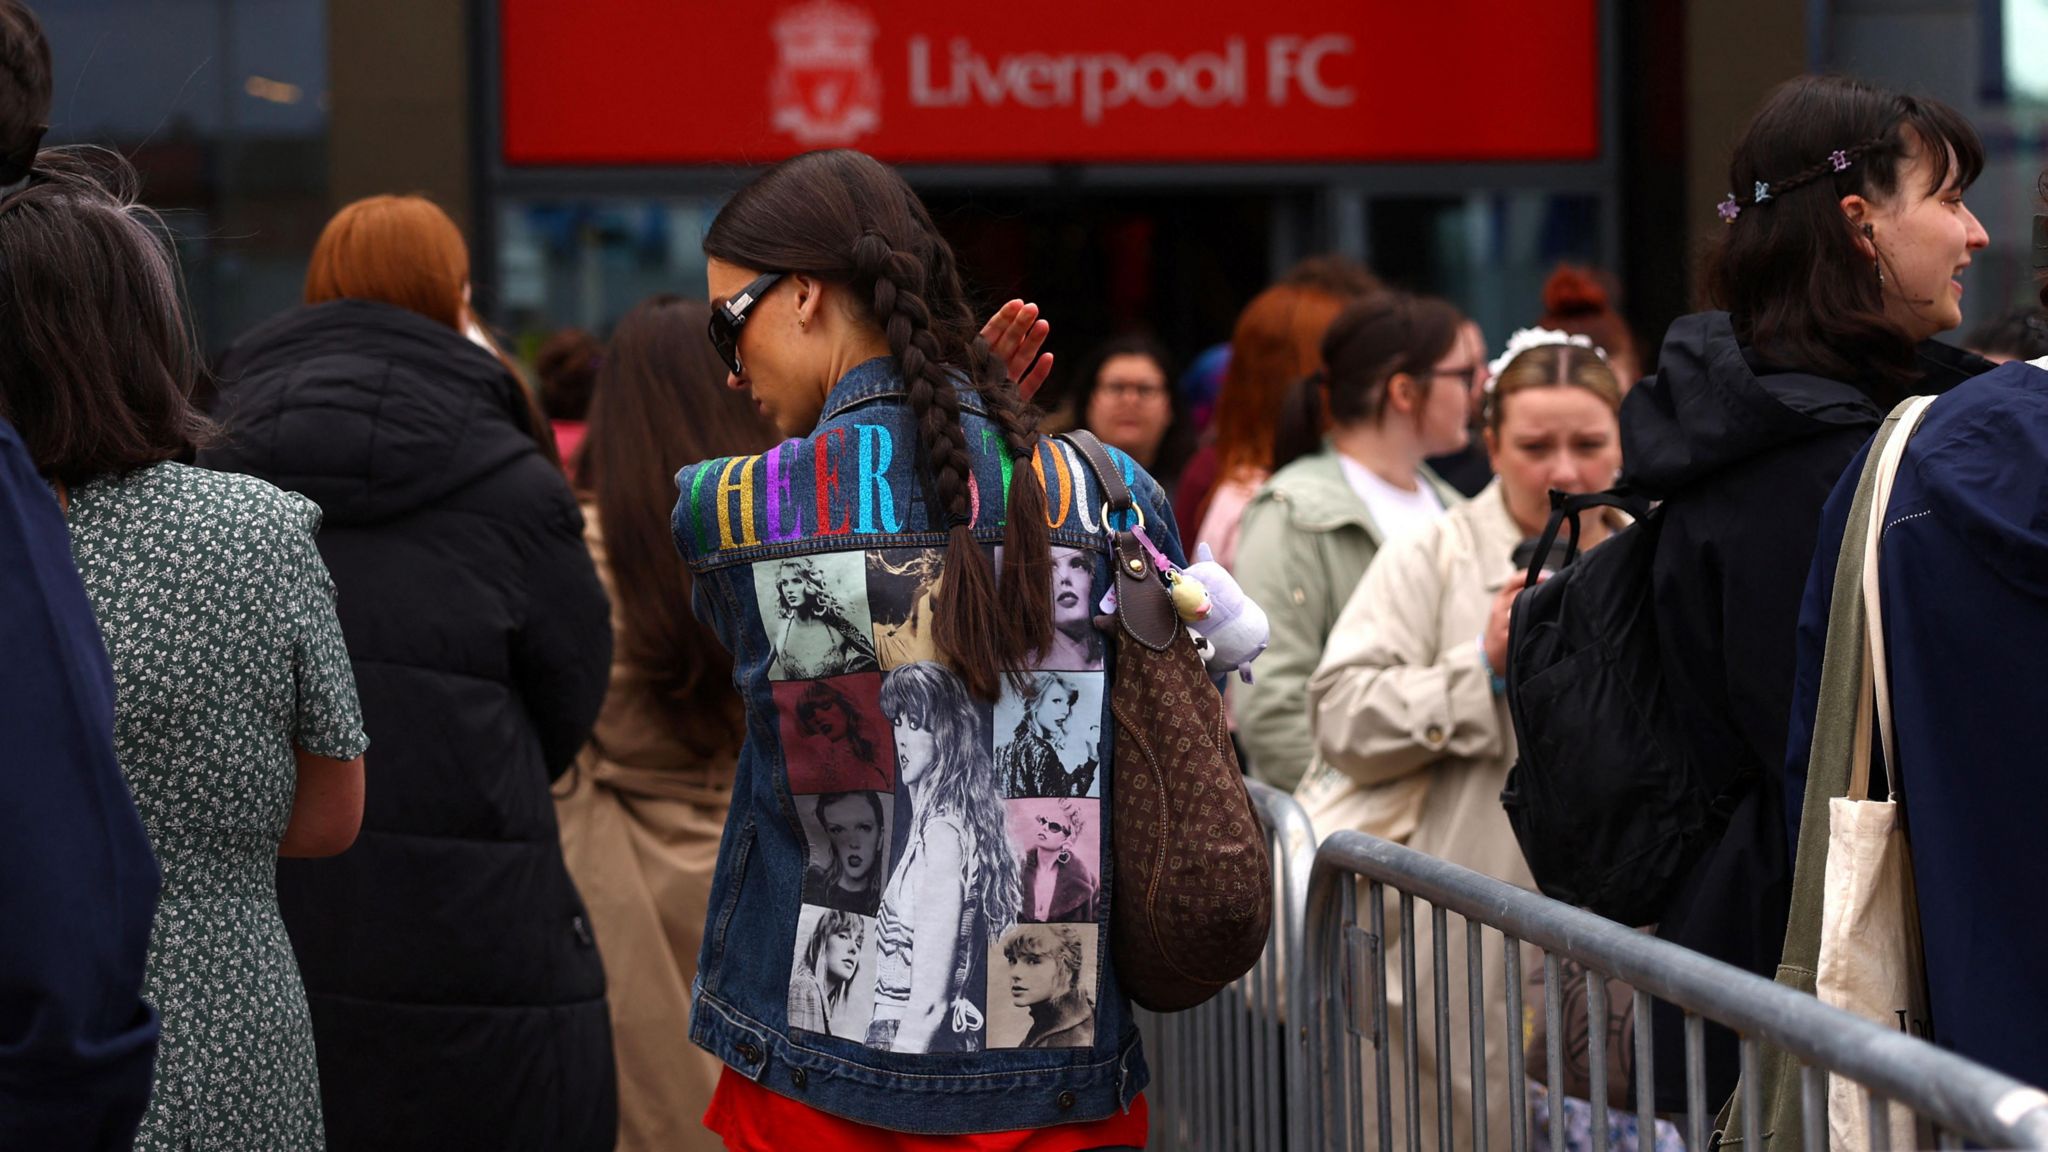 Fans queuing at the merchandise queue at Anfield Stadium